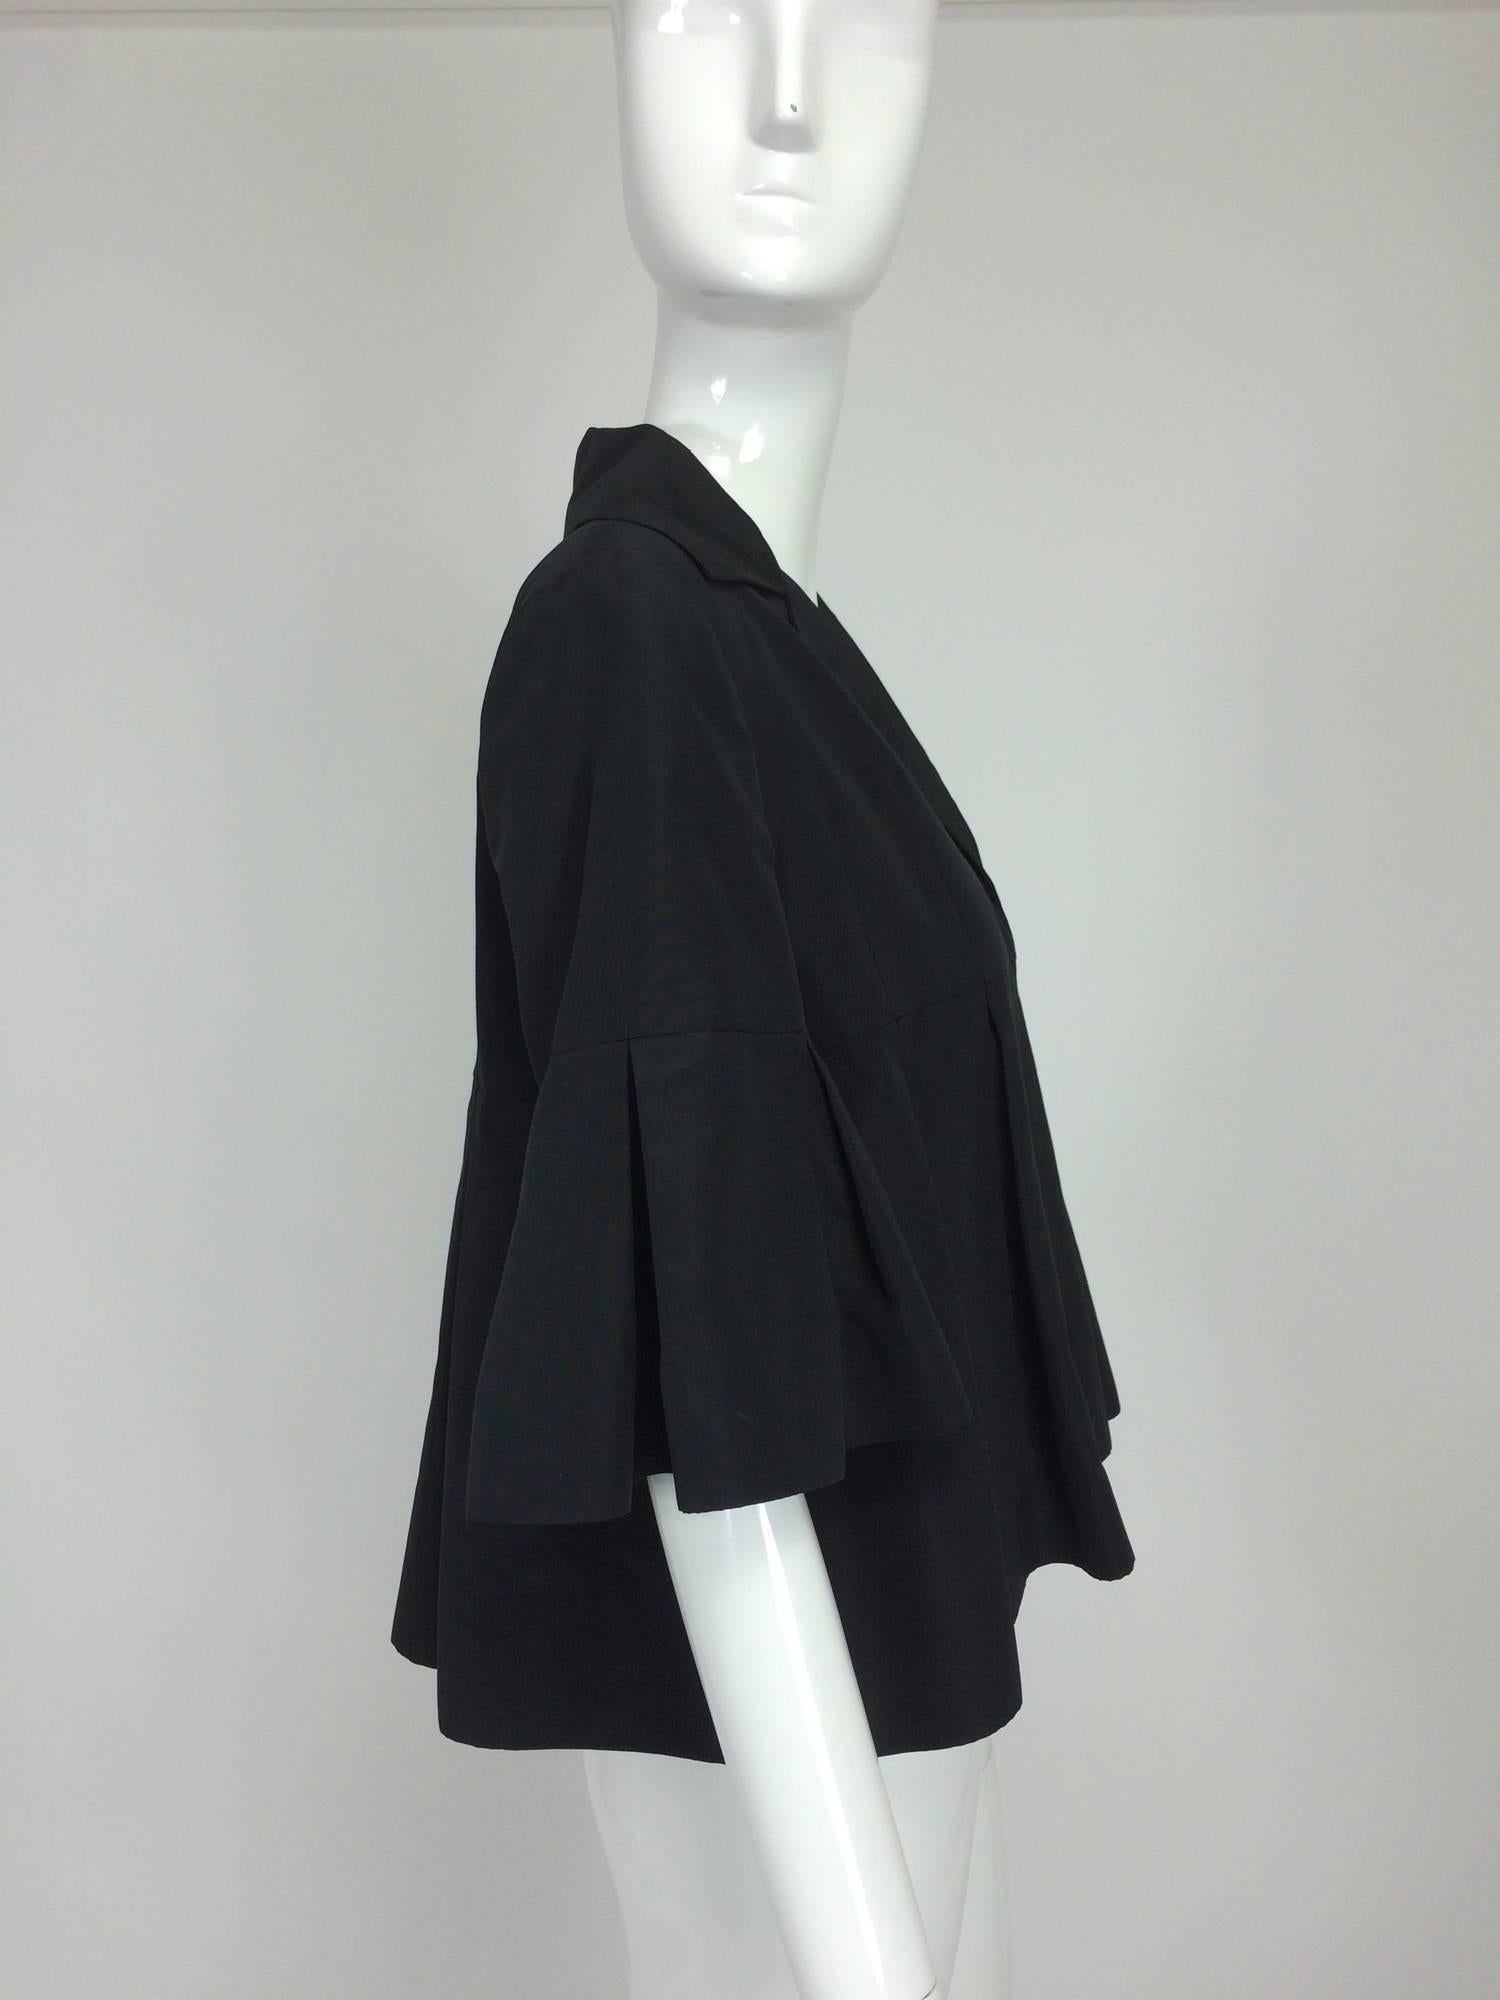 Christian Dior black silk cropped pleated jacket with pleated sleeves...Cropped jacket has a notched collar and yoke front and back...The jacket falls in open pleats below the yoke...The sleeves fall in open pleats beginning at mid upper arm and end